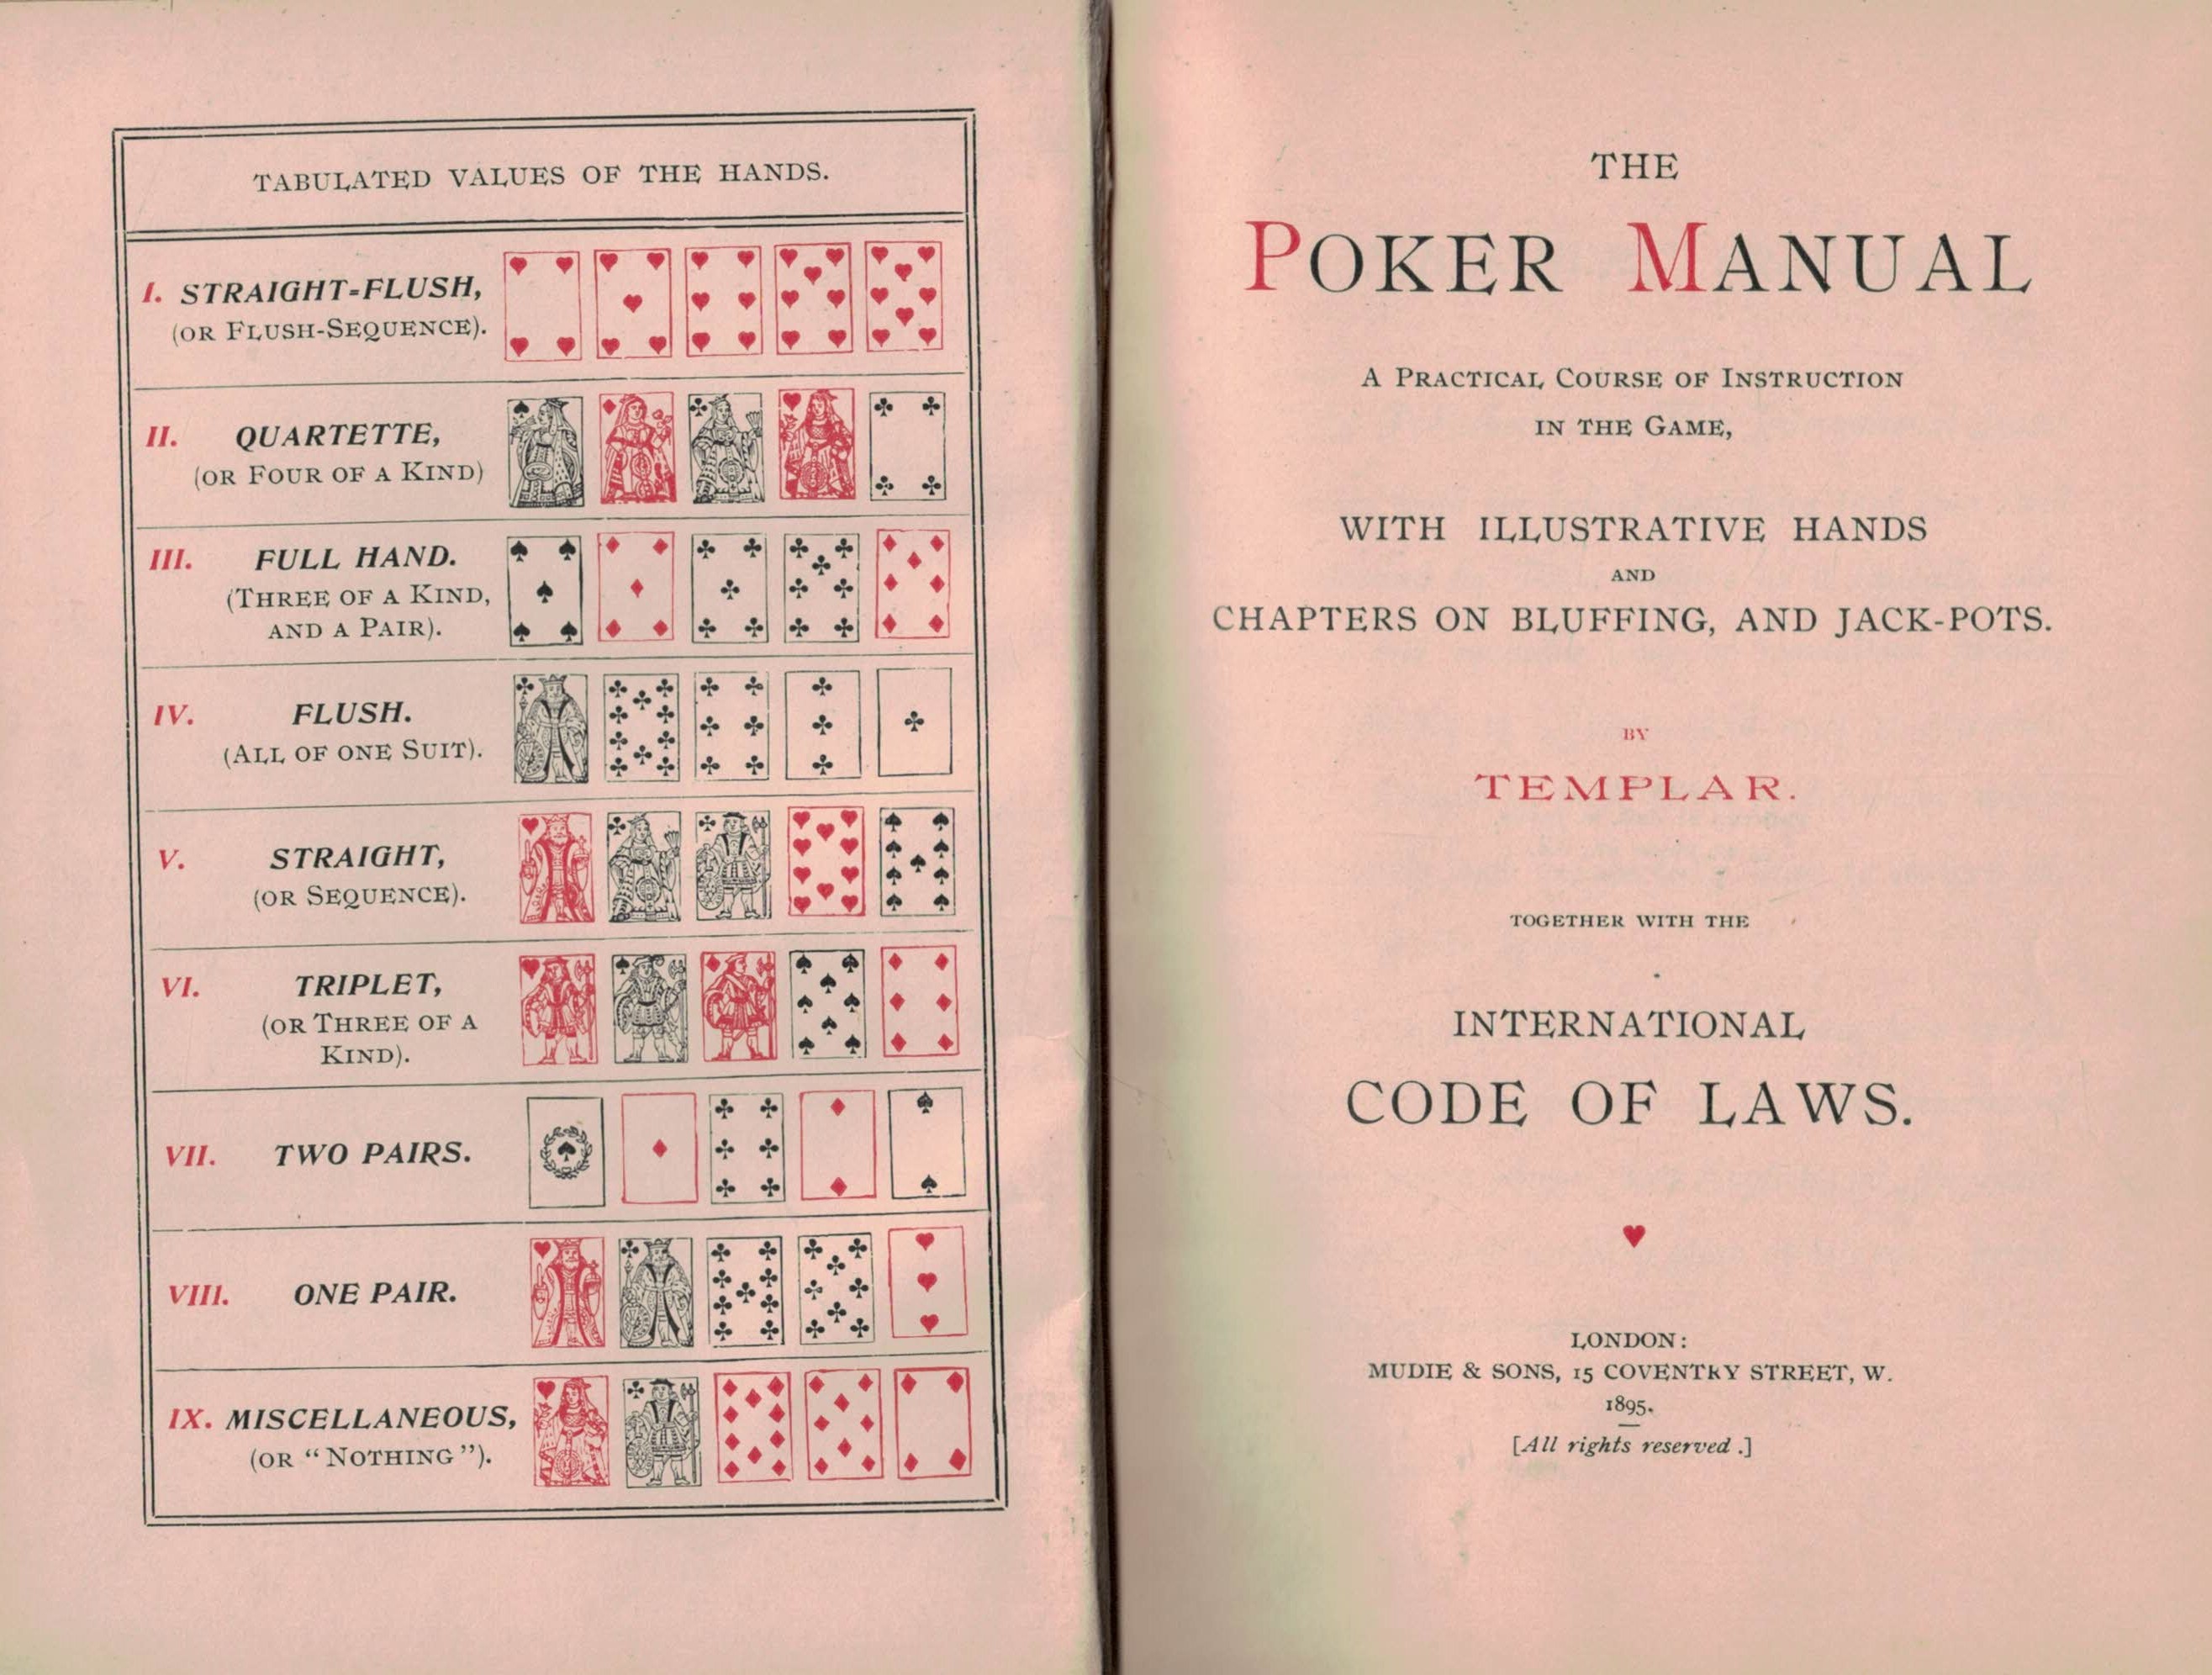 The Poker Manual. A Practical Course of Instruction in the Game, with Illustrative Hands Chapters on Bluffing and Jack-Pots.